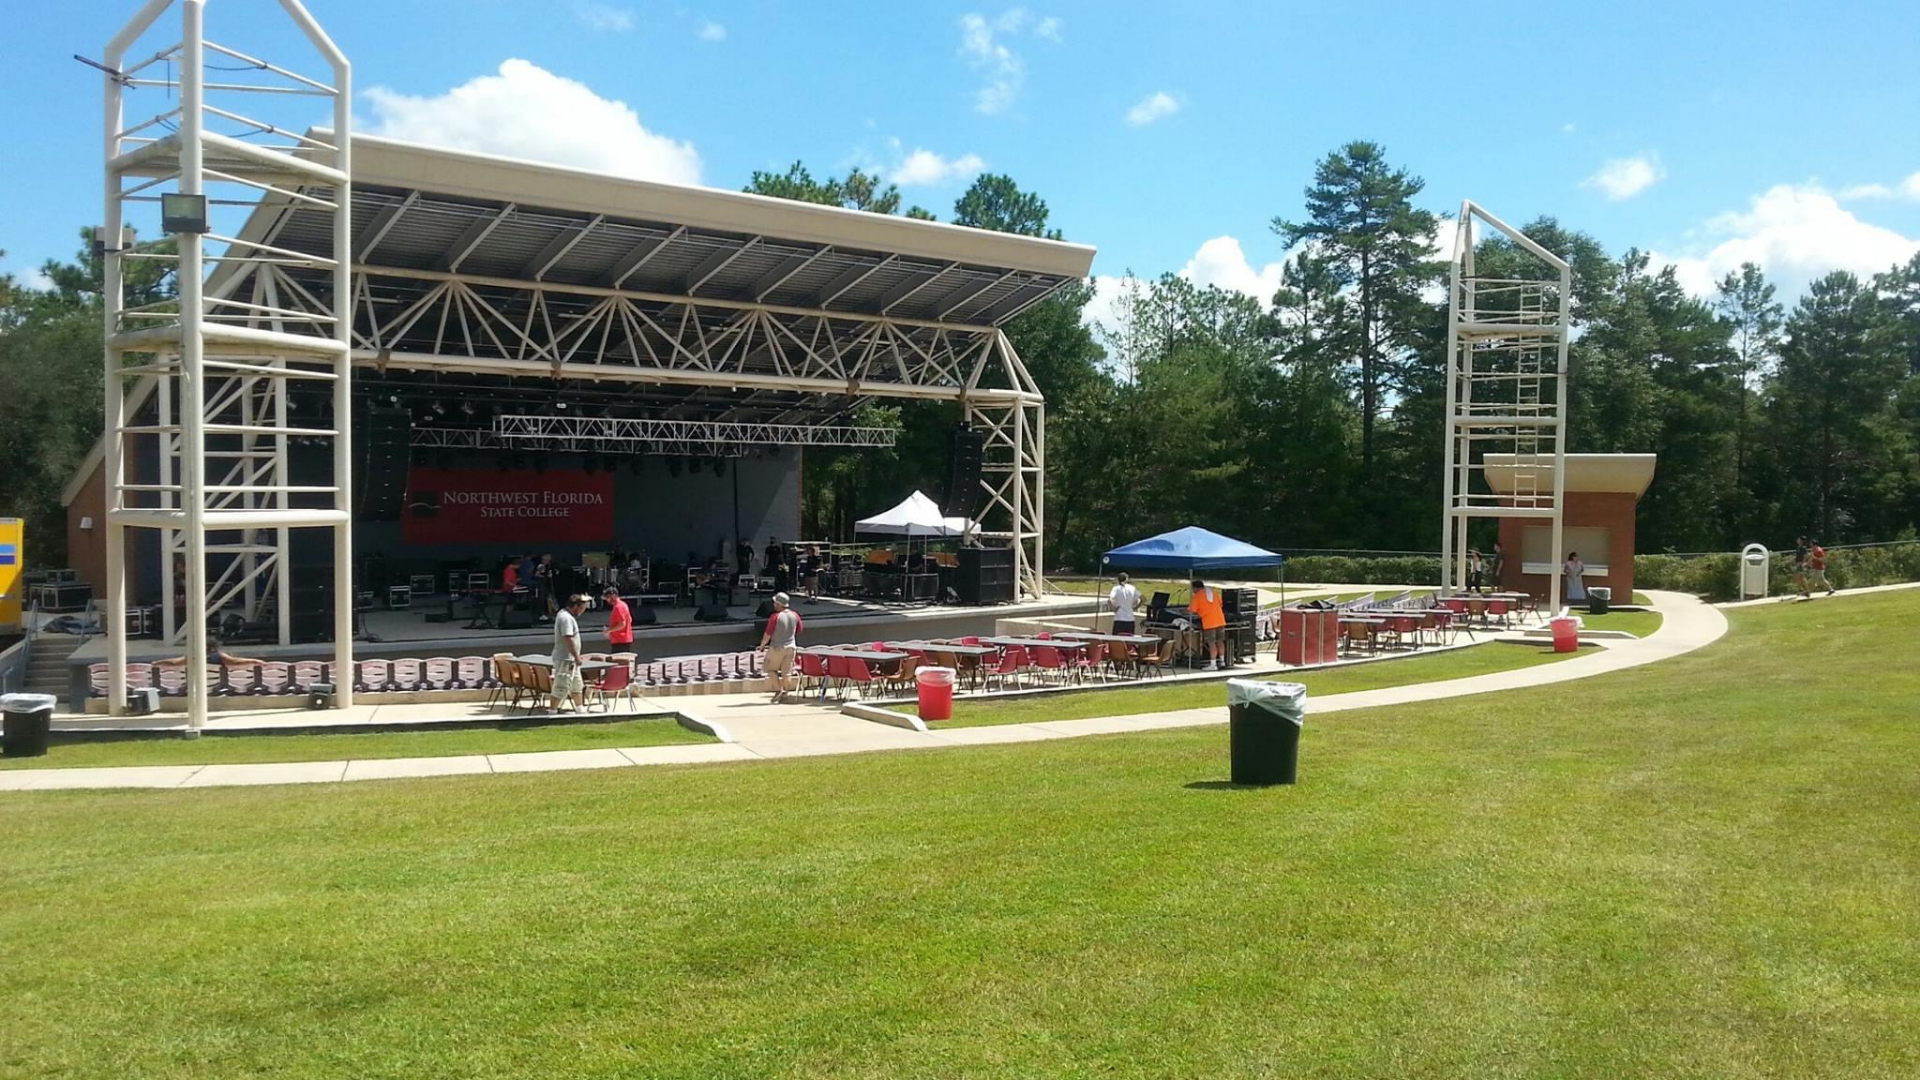 northwest-florida-state-college-amphitheater-front-main-stage